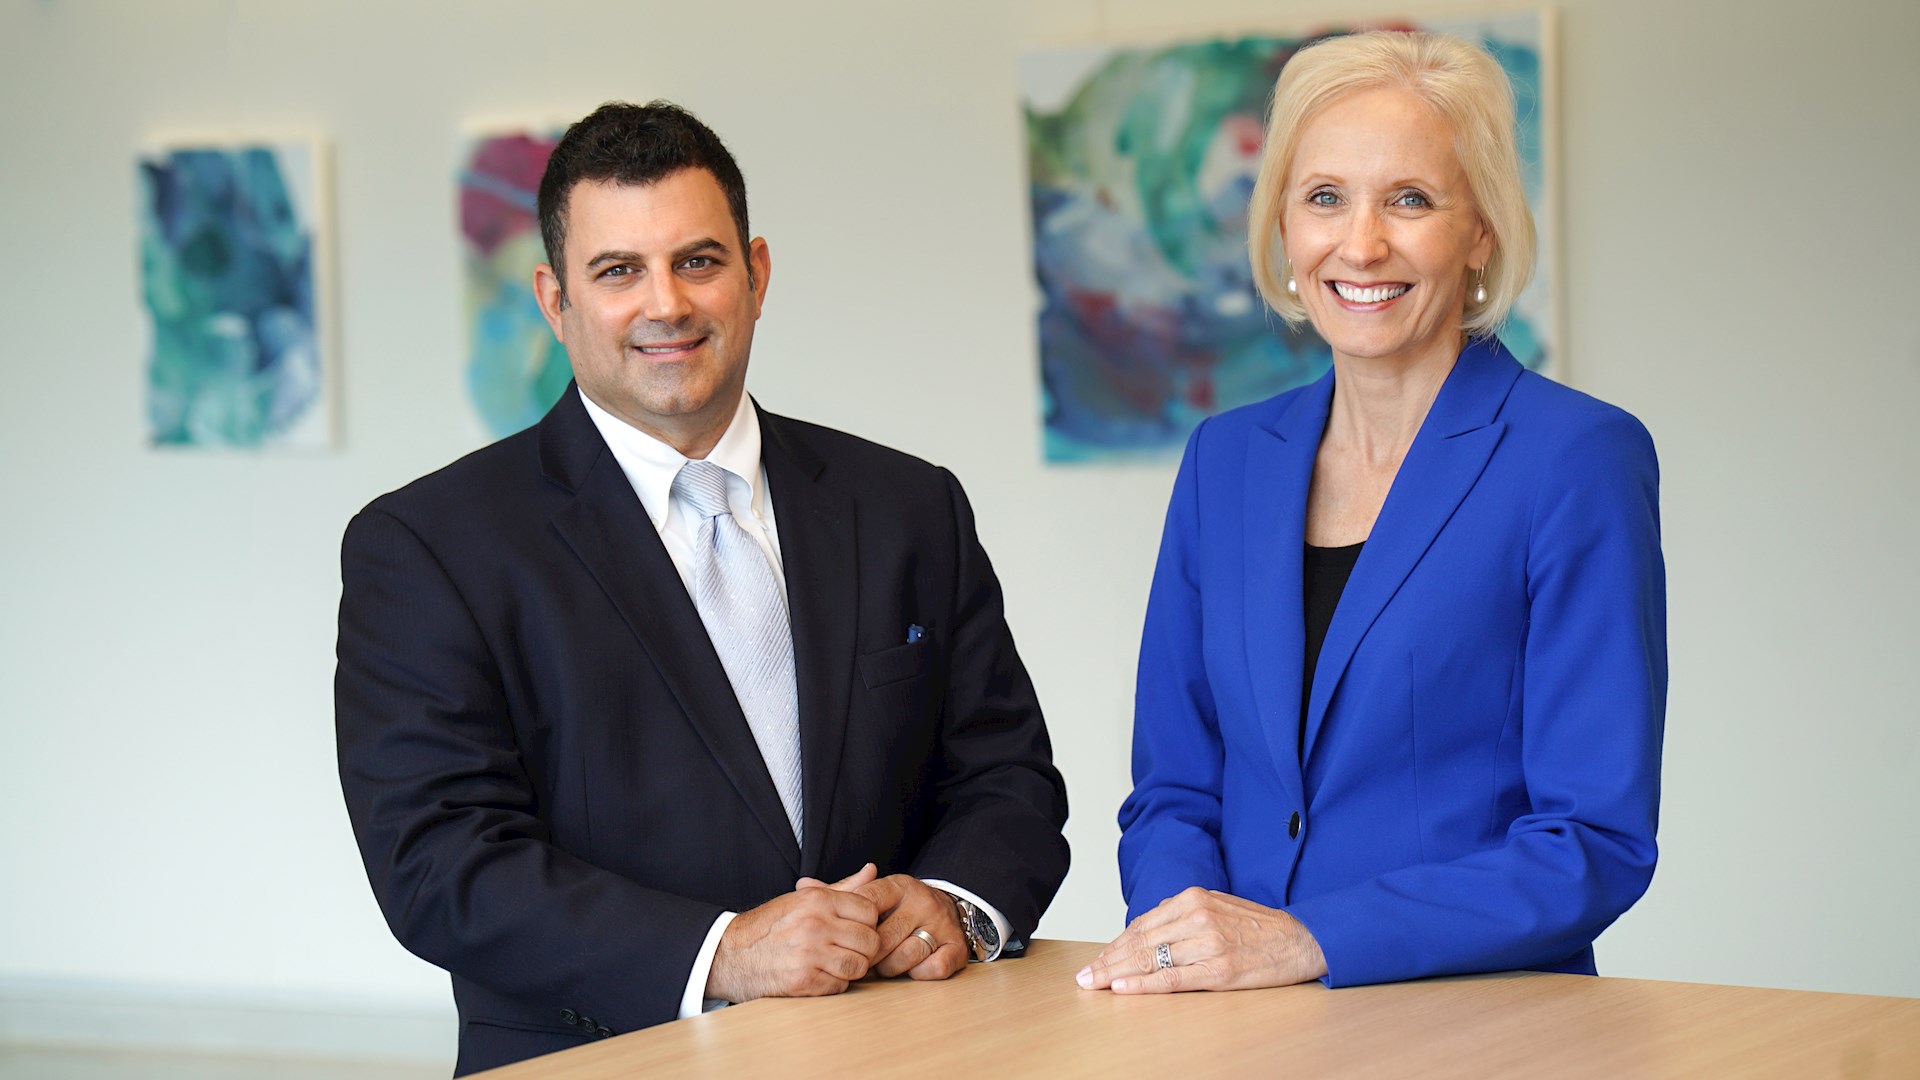 WellSpan President and CEO Roxanna Gapstur, Ph.D., R.N and Capital Blue Cross President and CEO Todd Shamash


*This photo was taken prior to current masking guidelines*